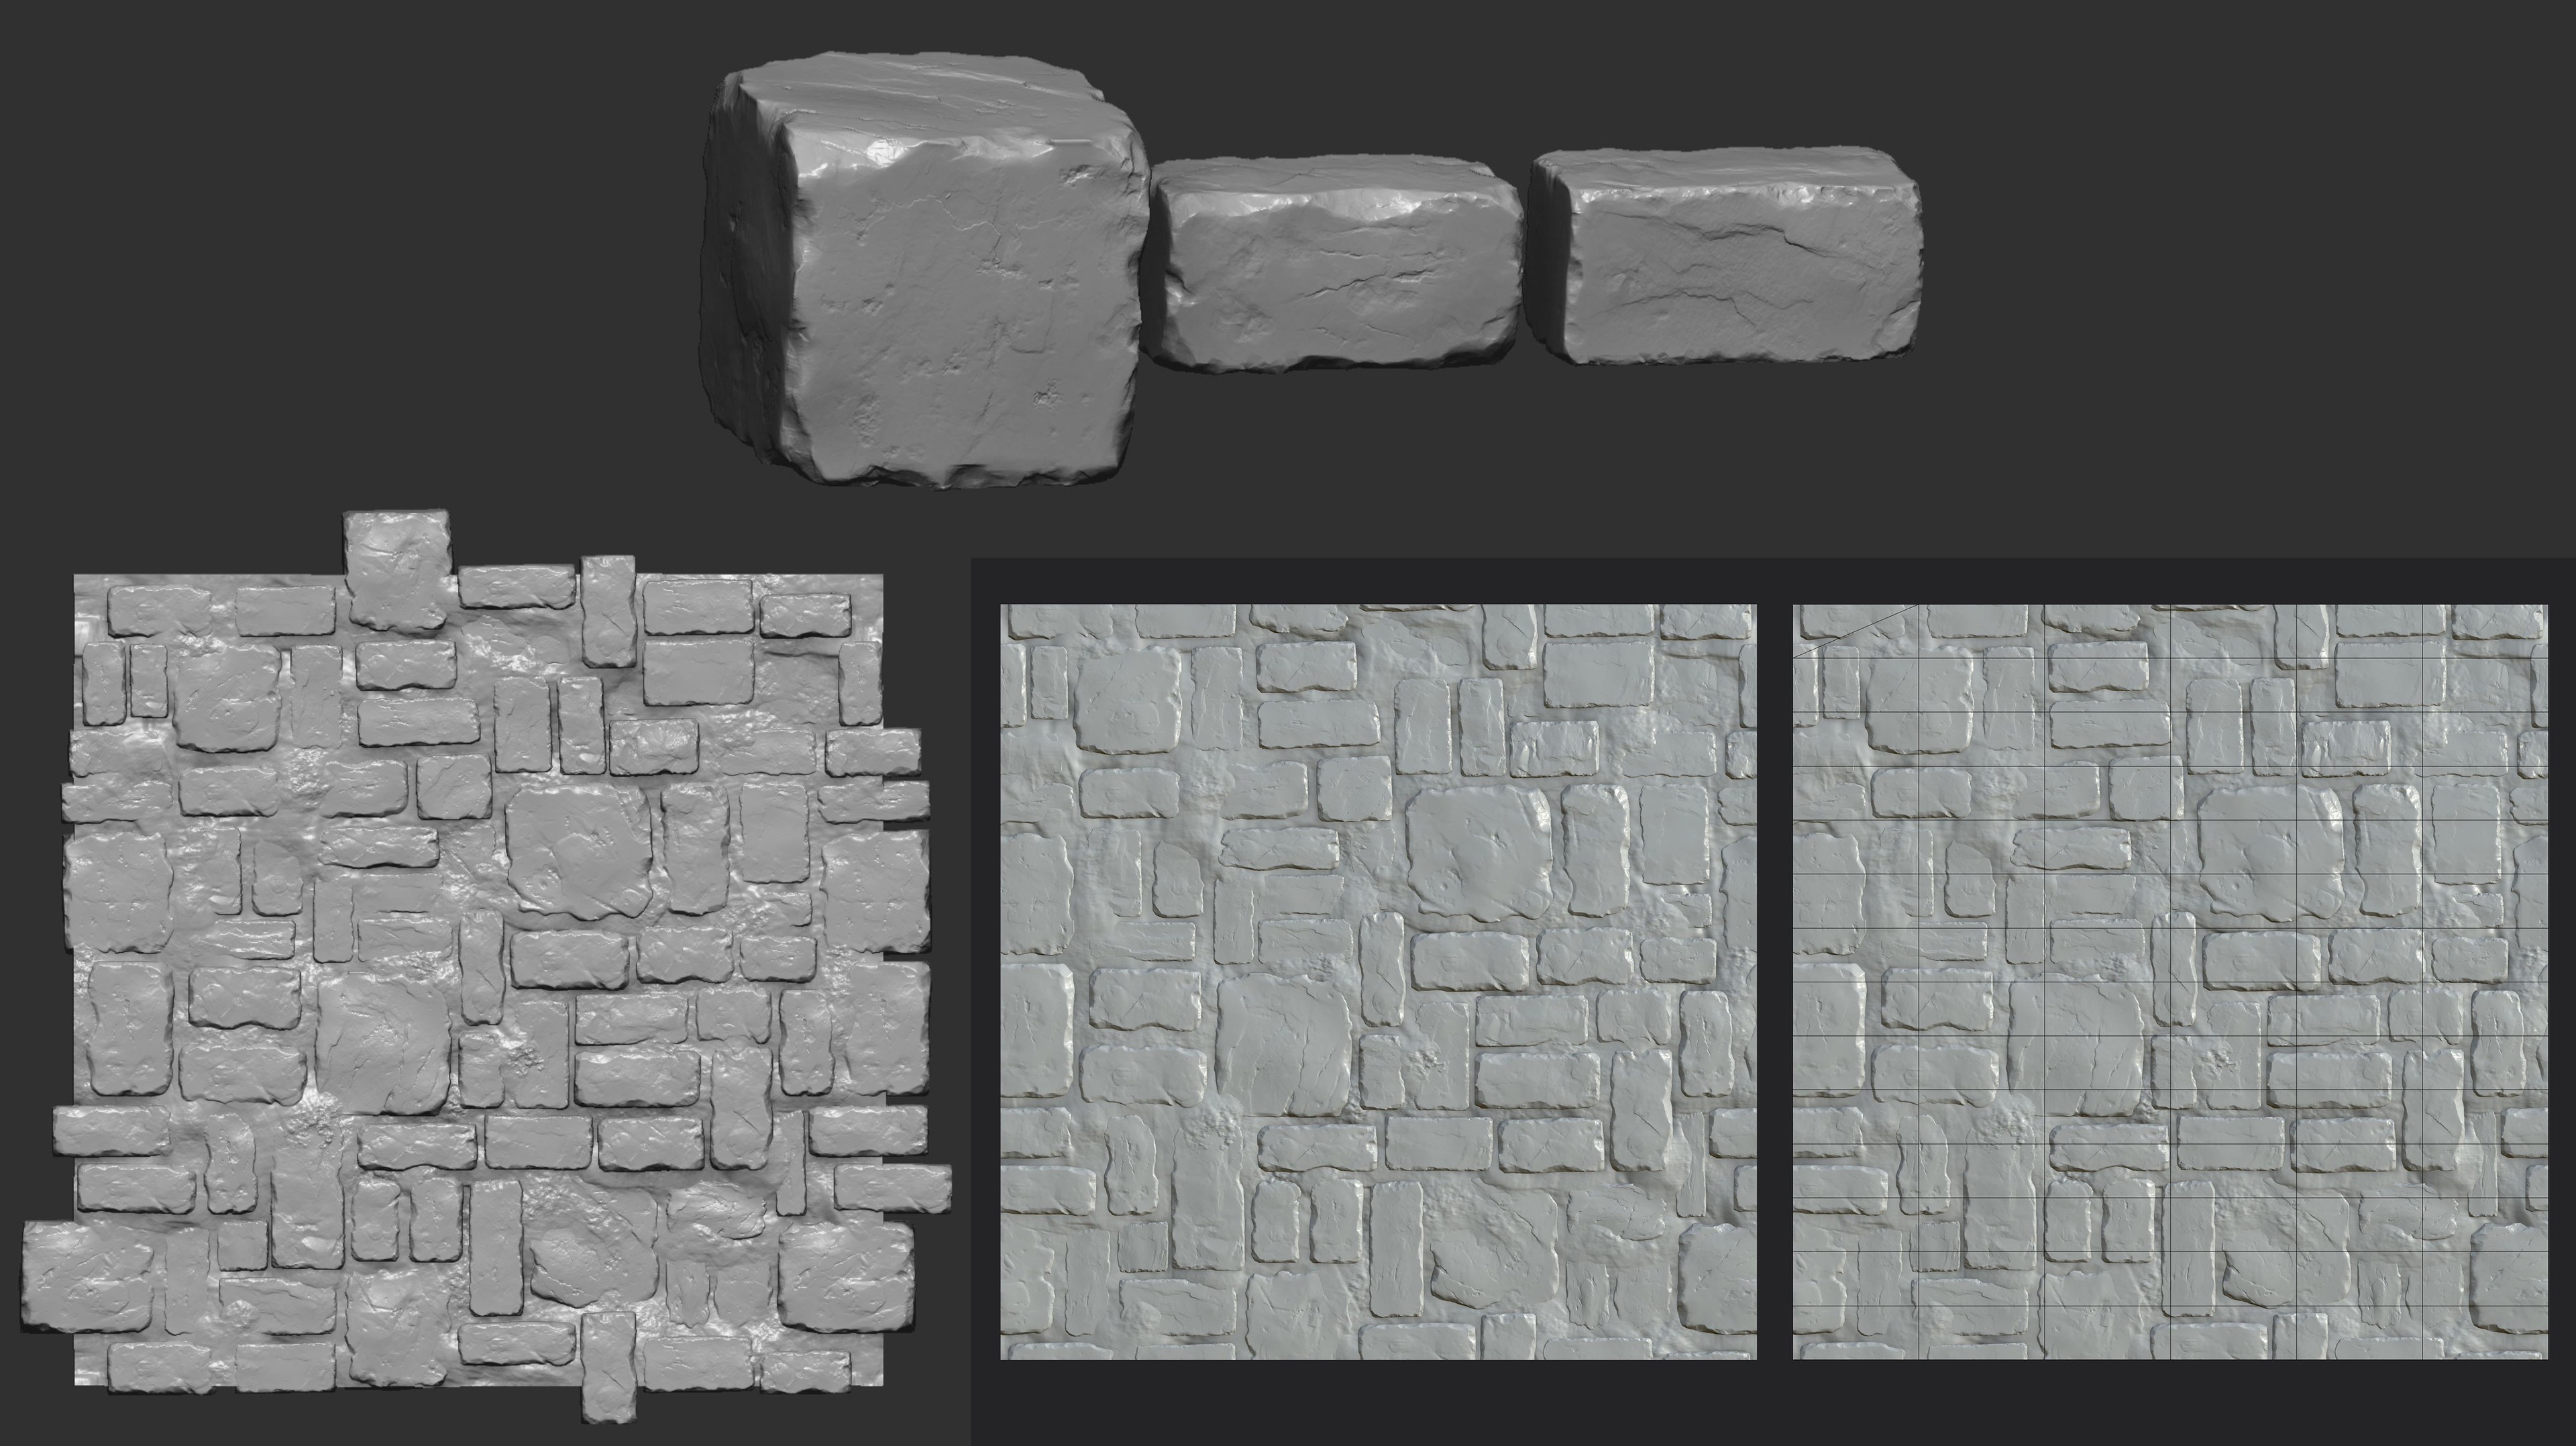 Zbrush model on top and left side, low poly bake and wire-frame on right side